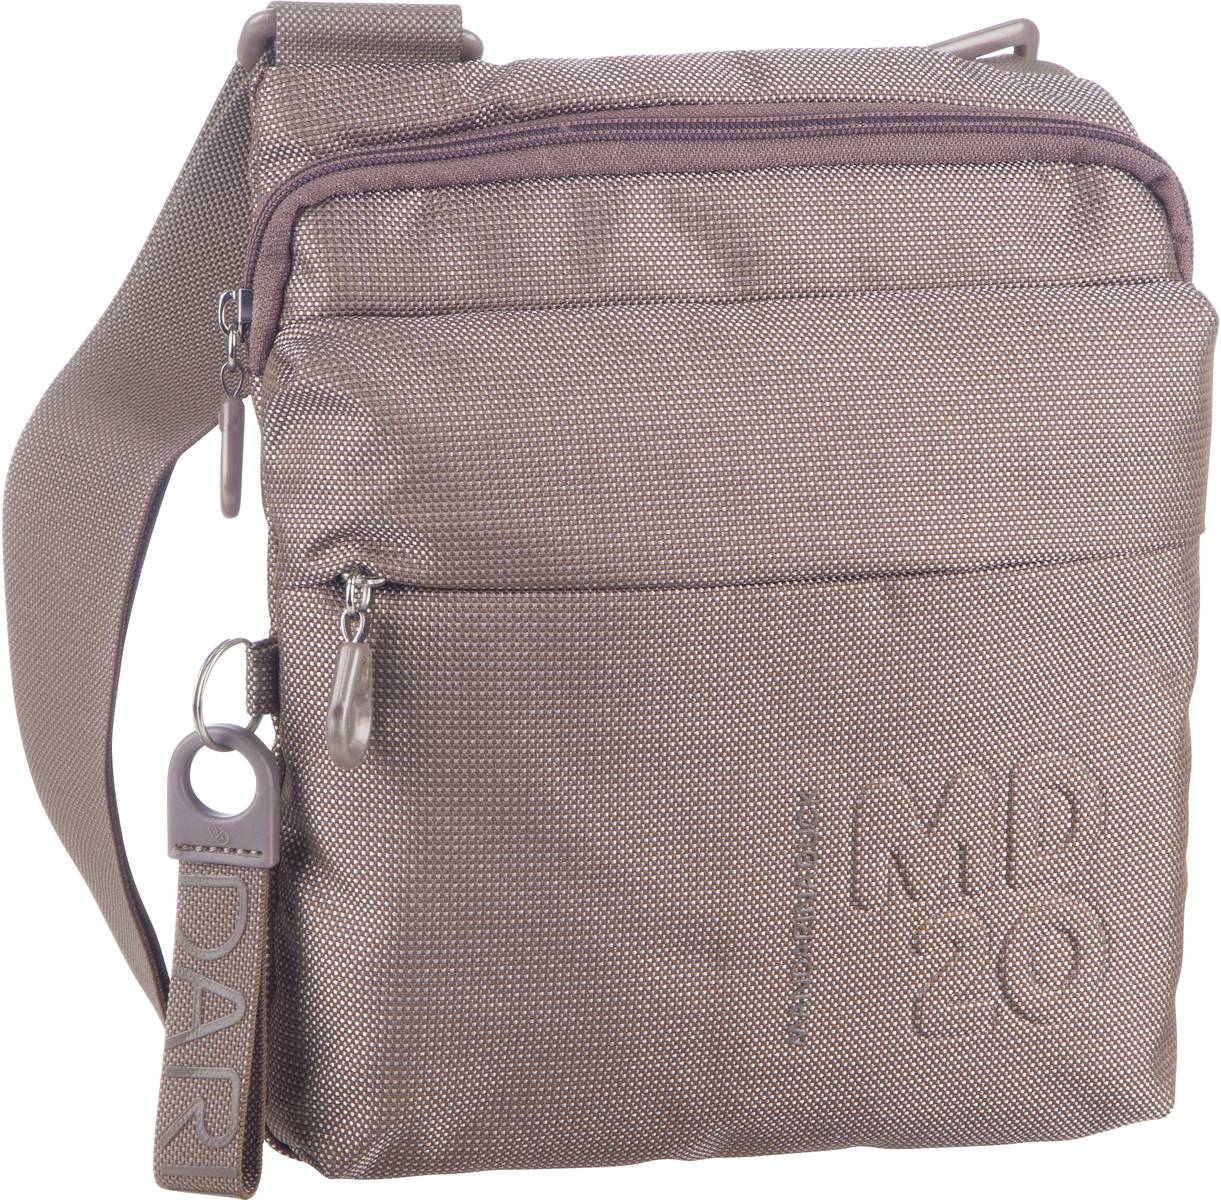 Mandarina Duck MD20 Small Crossover Bag QMT04 - Taupe